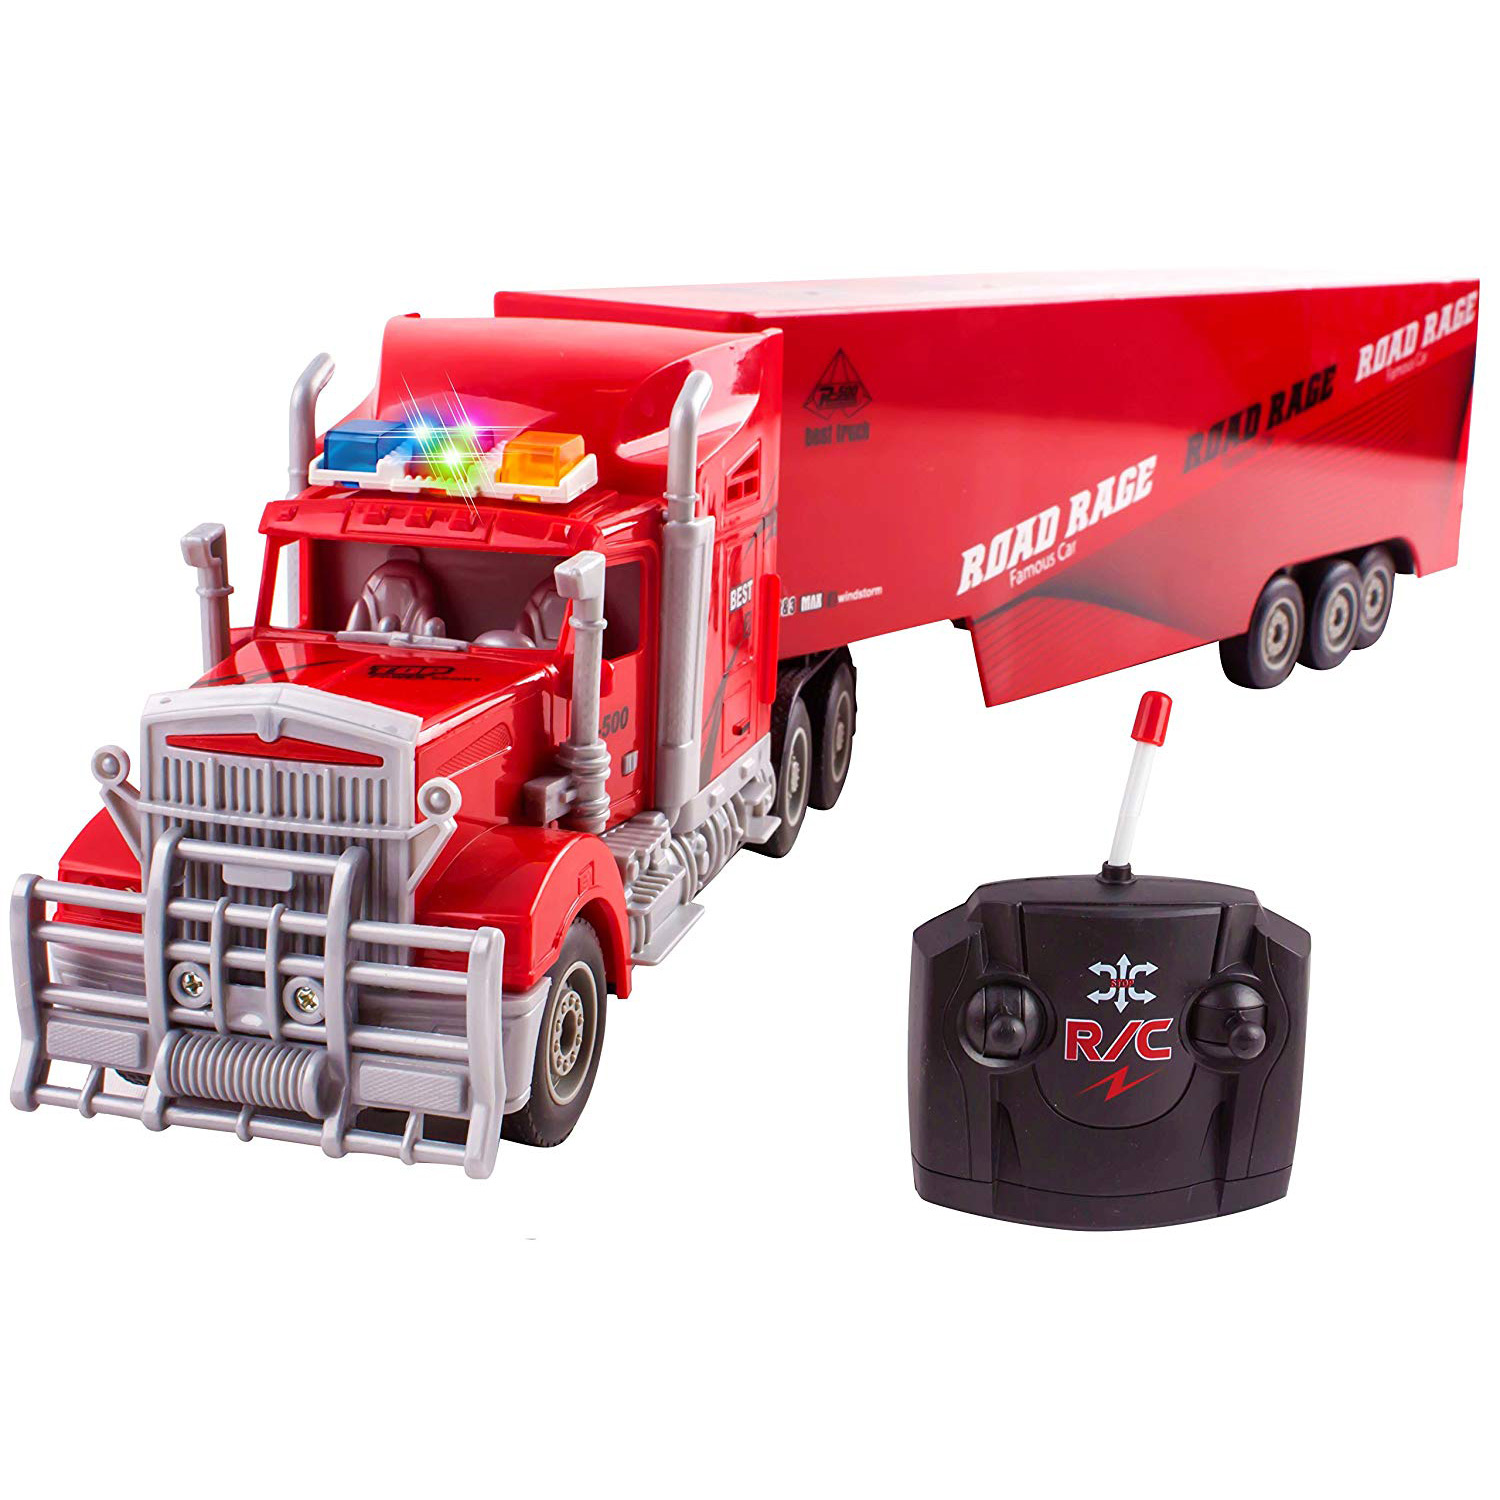 Toy Semi Truck Trailer 23\" Electric Hauler Remote Control RC Childrenâ€™s Transporter Ready To Run Full Cargo Perfect Big Rig For Kids Toys (Red)